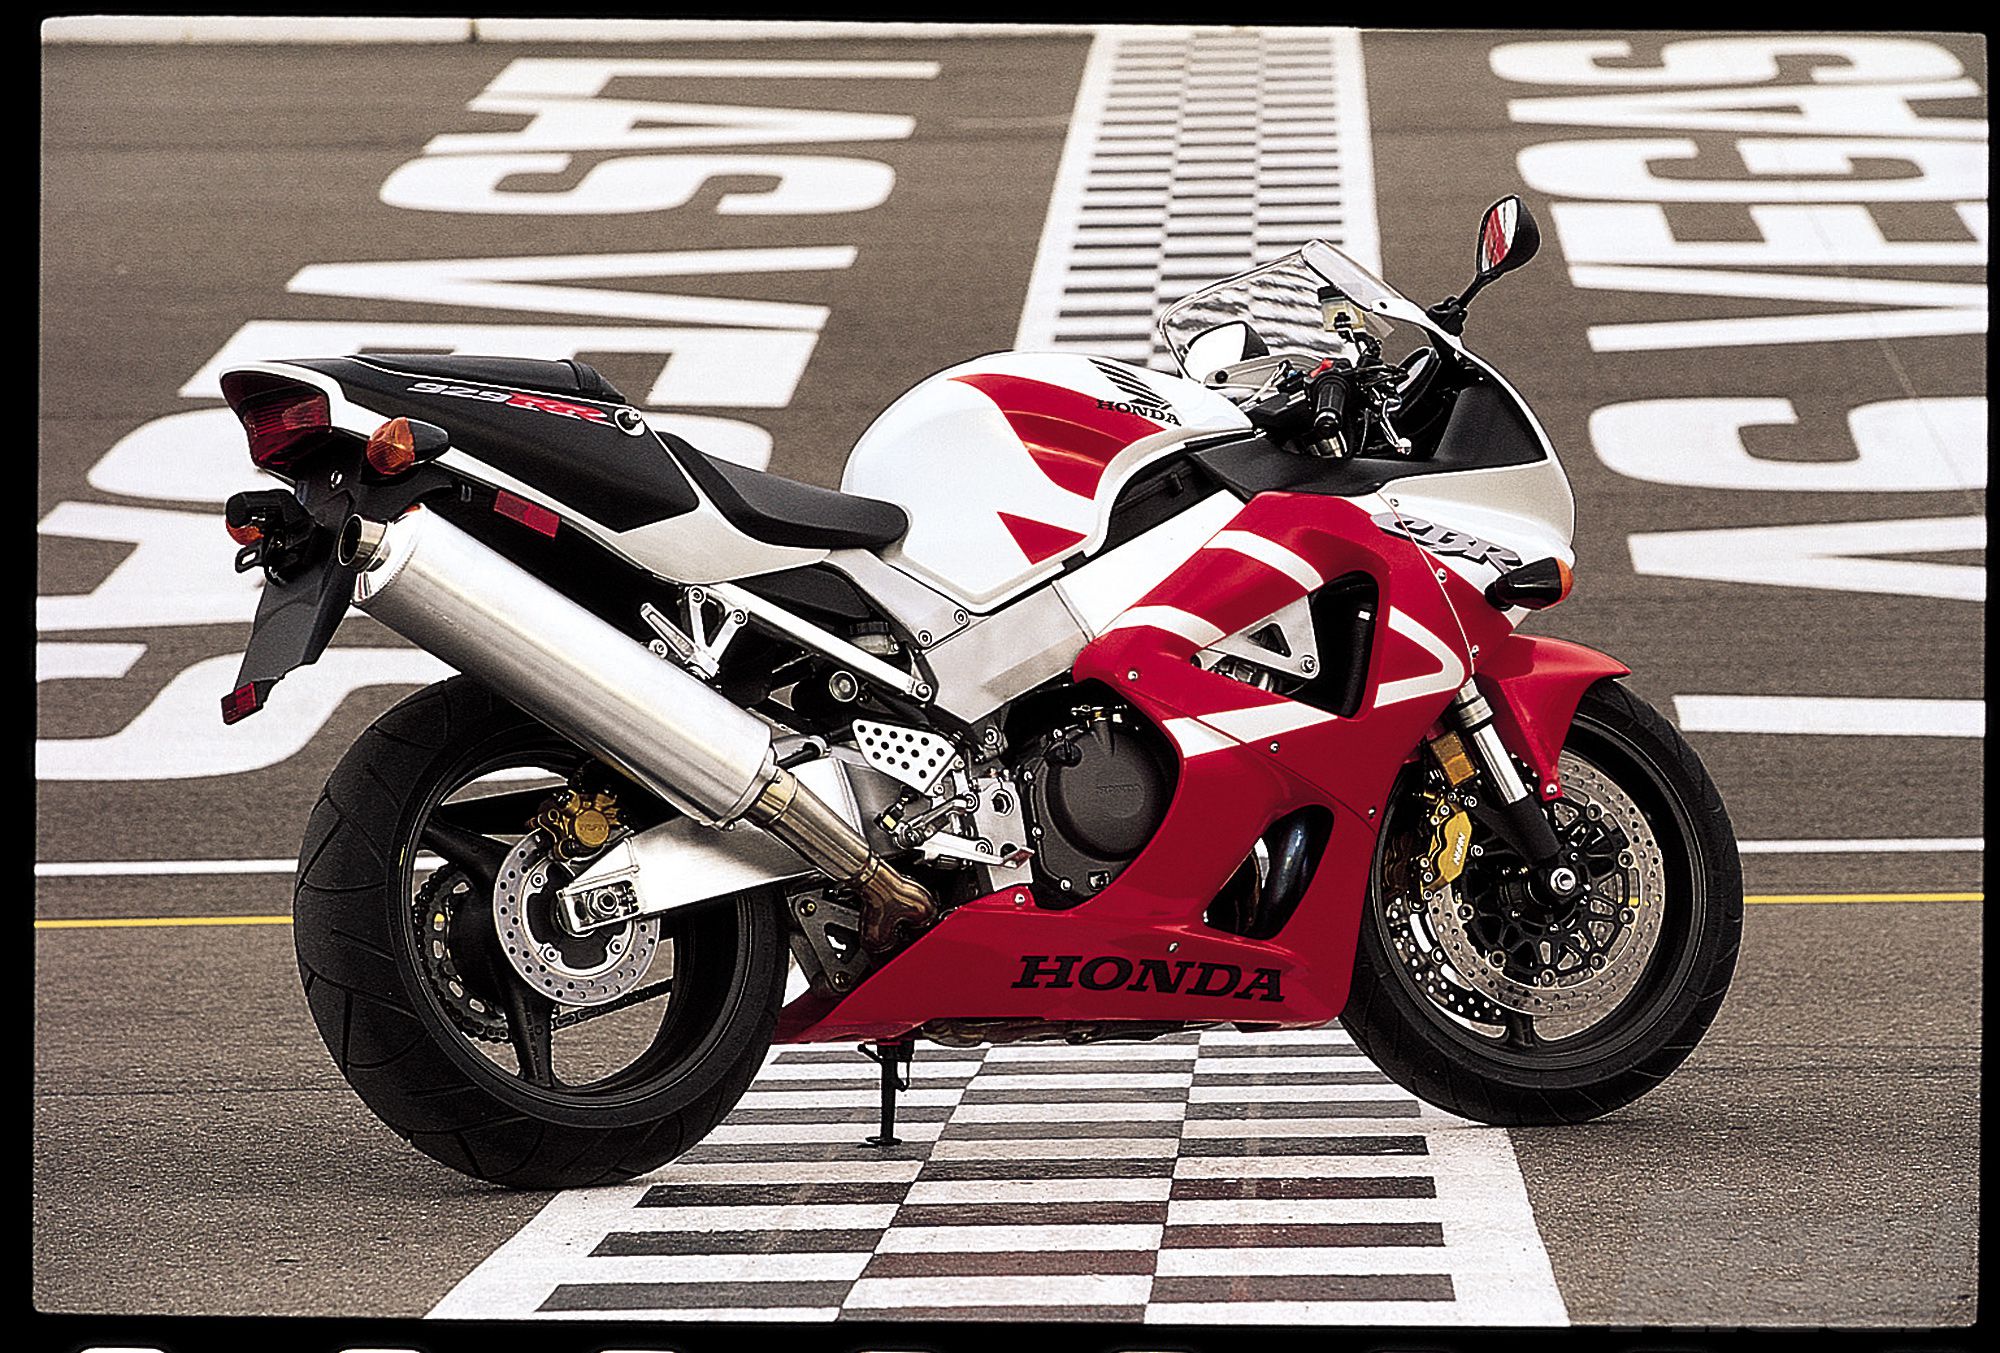 Tadao Baba and Honda Strike Back With The CBR929RR—From The